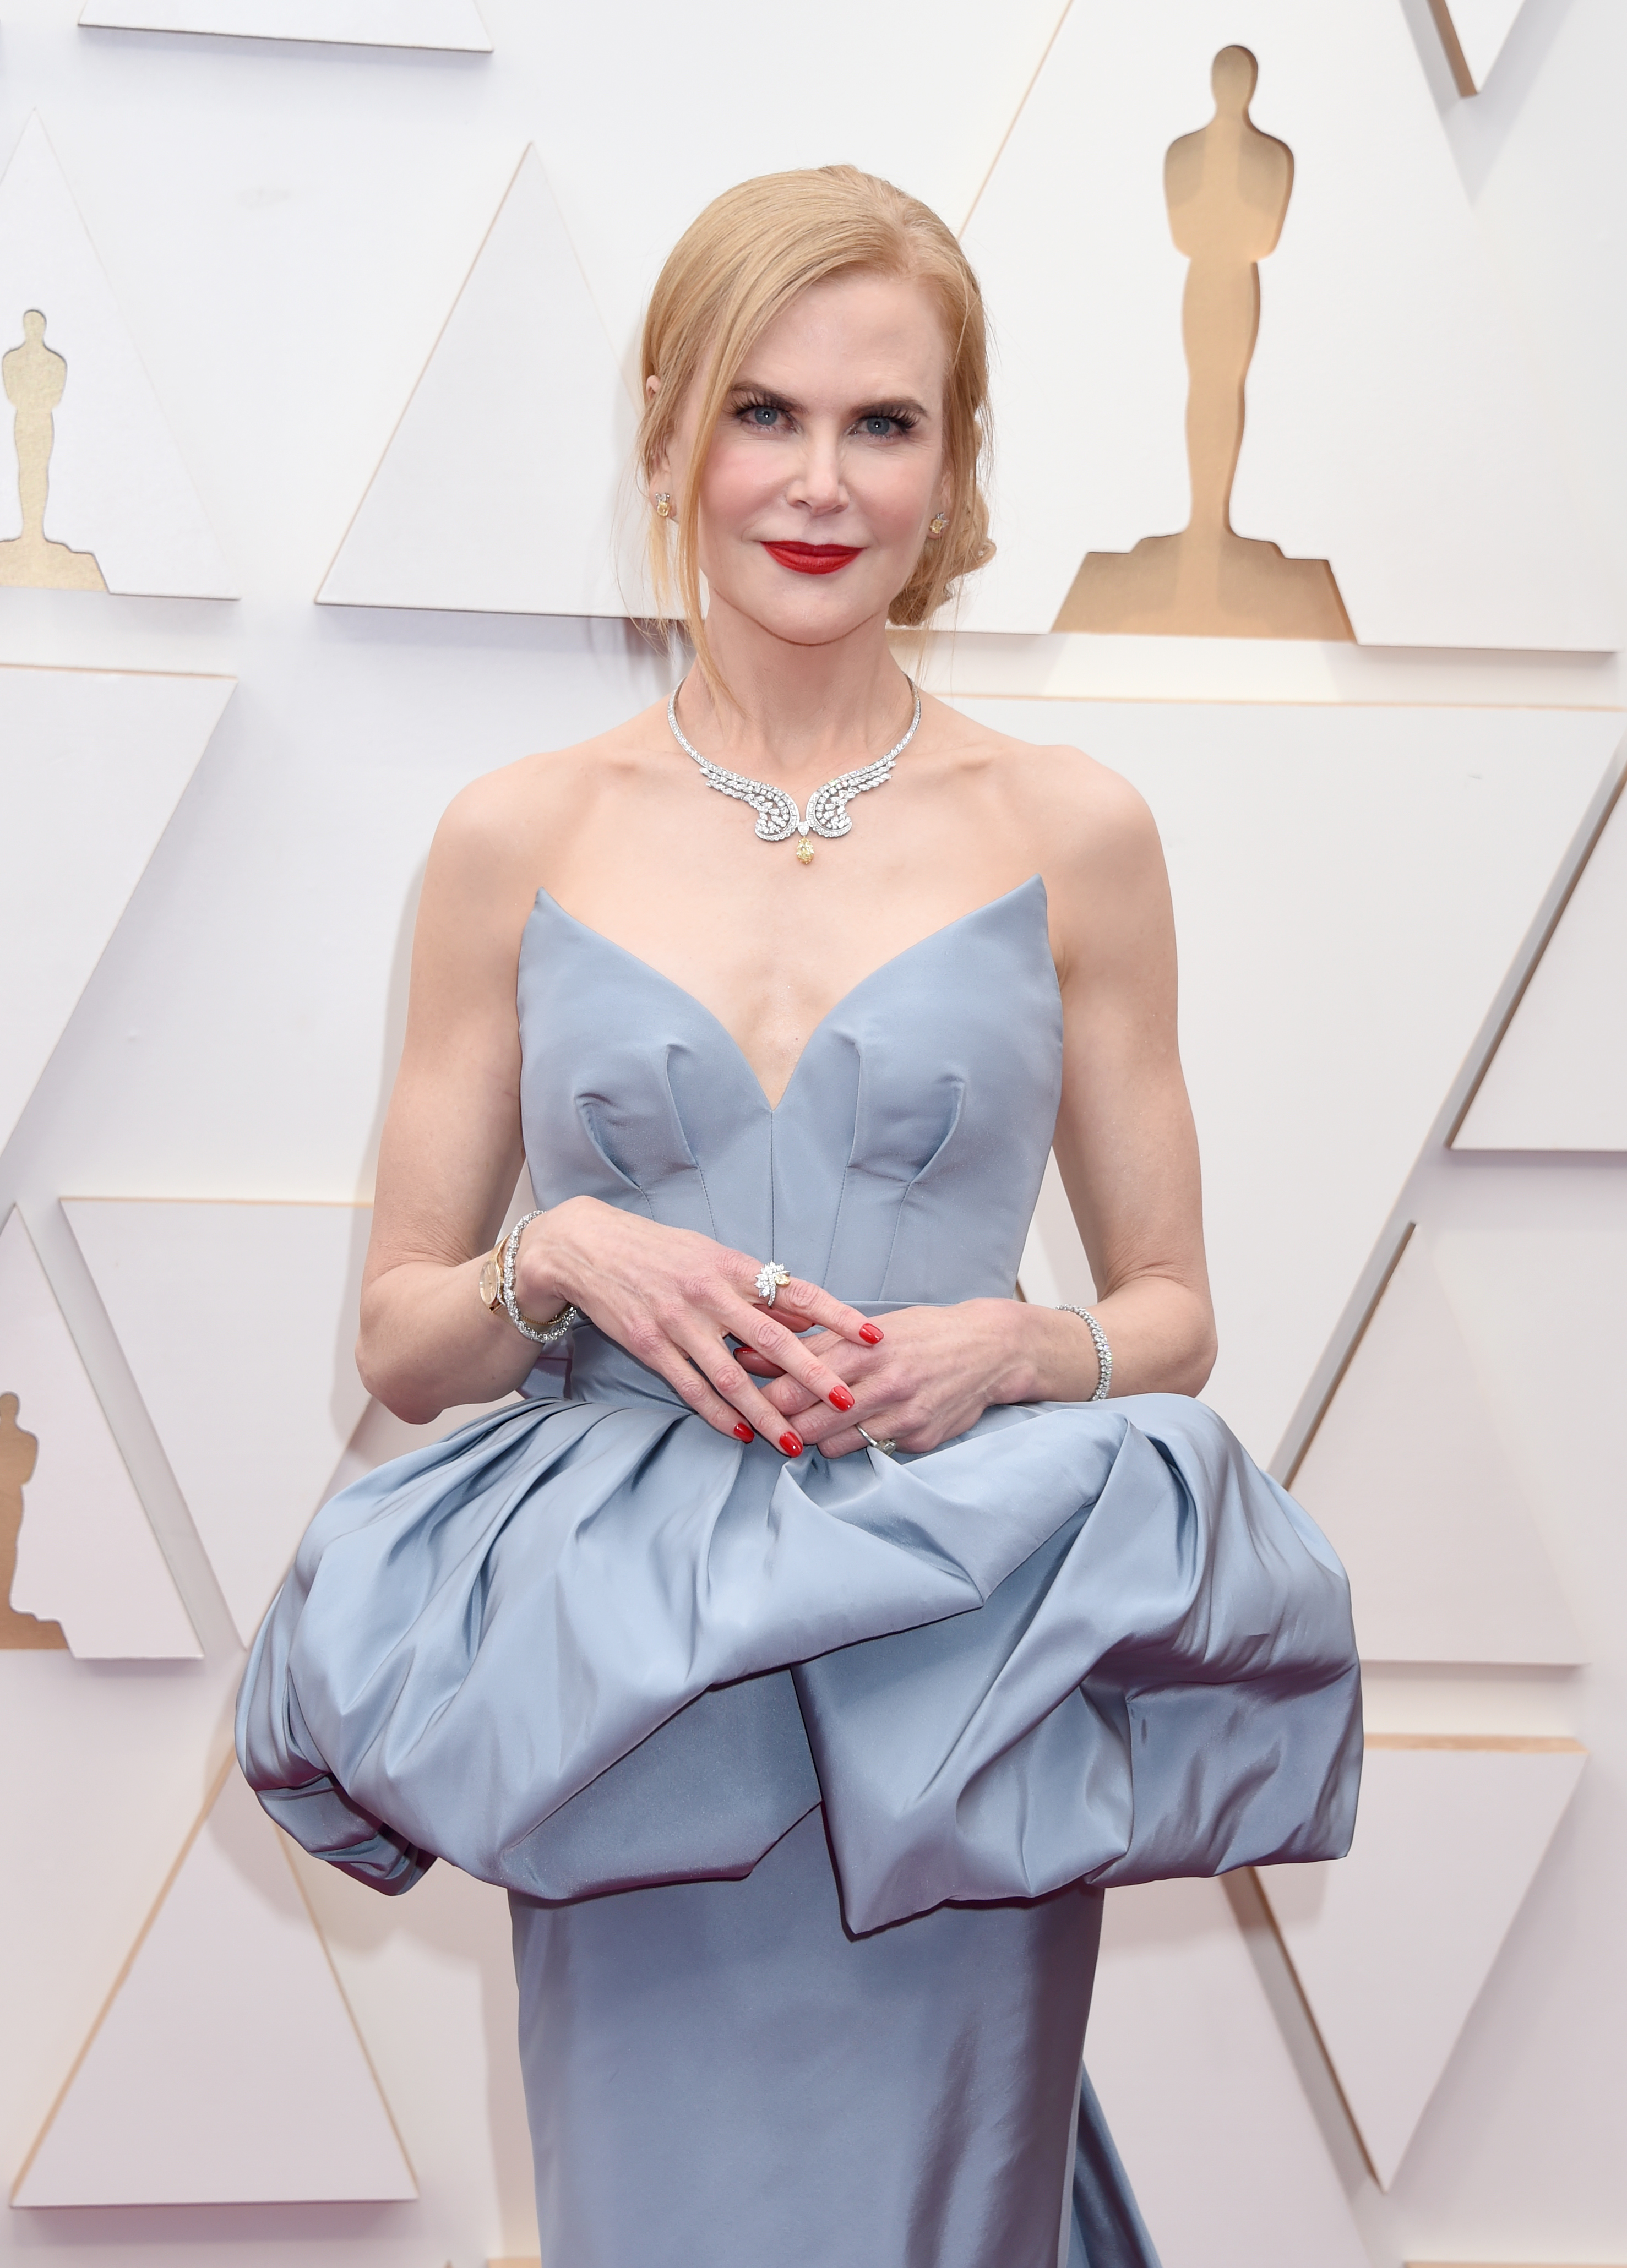 Nicole Kidman at the 94th Academy Awards held at Dolby Theatre at the Hollywood & Highland Center in Los Angeles, California, on March 27, 2022. | Source: Getty Images